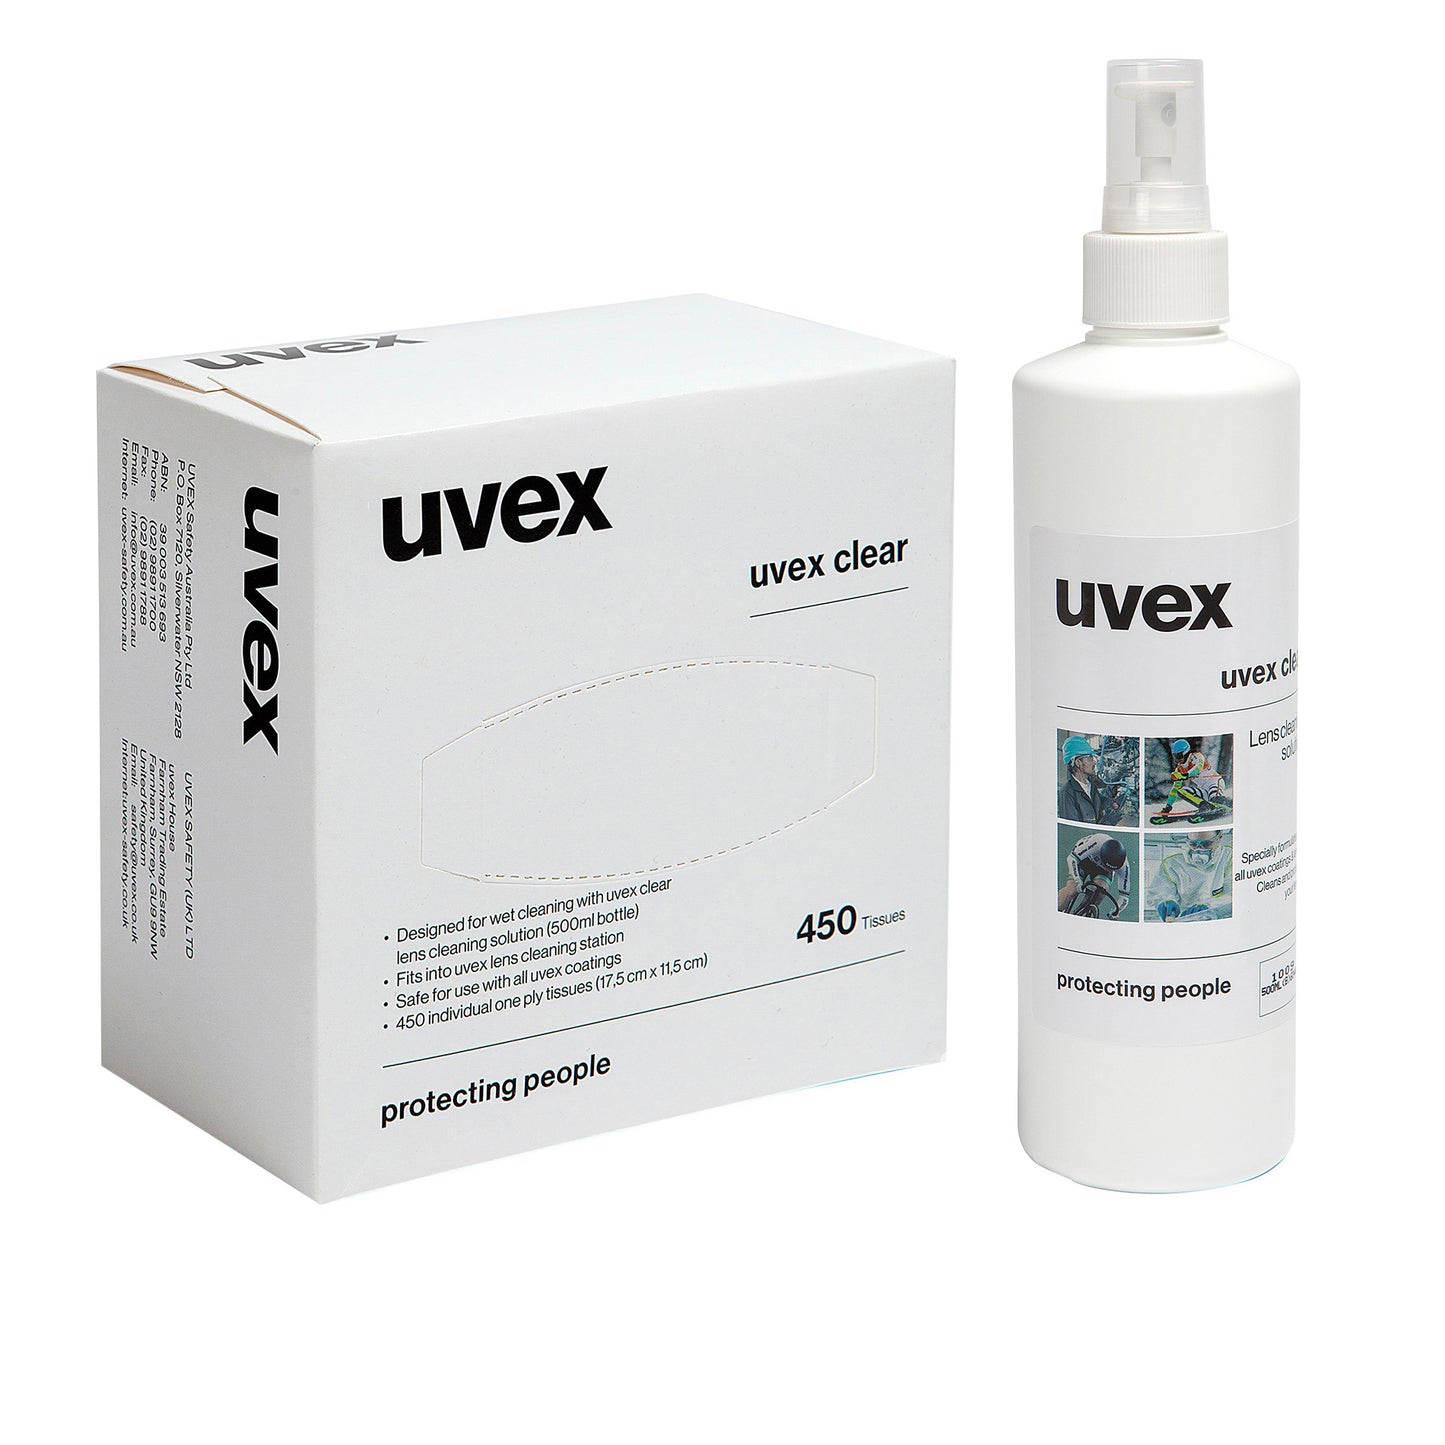 uvex 500ml Glasses Lens Cleaning Solution Fluid + 450 Cleaning Wipes